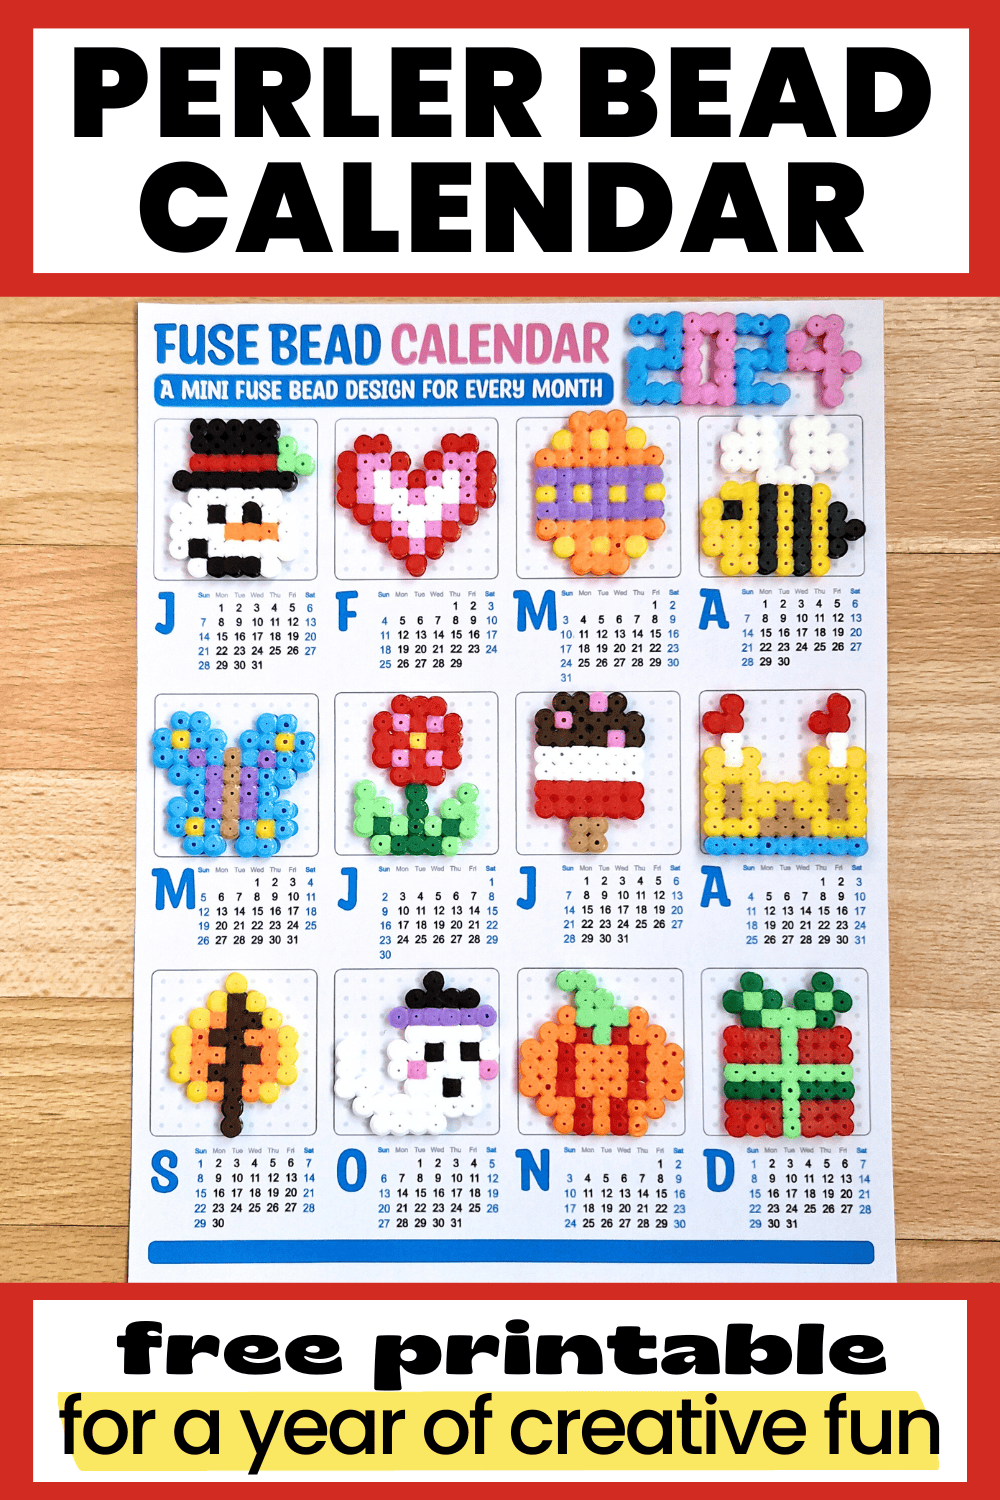 Perler bead calendar for 2024 with examples of the crafts for each month.